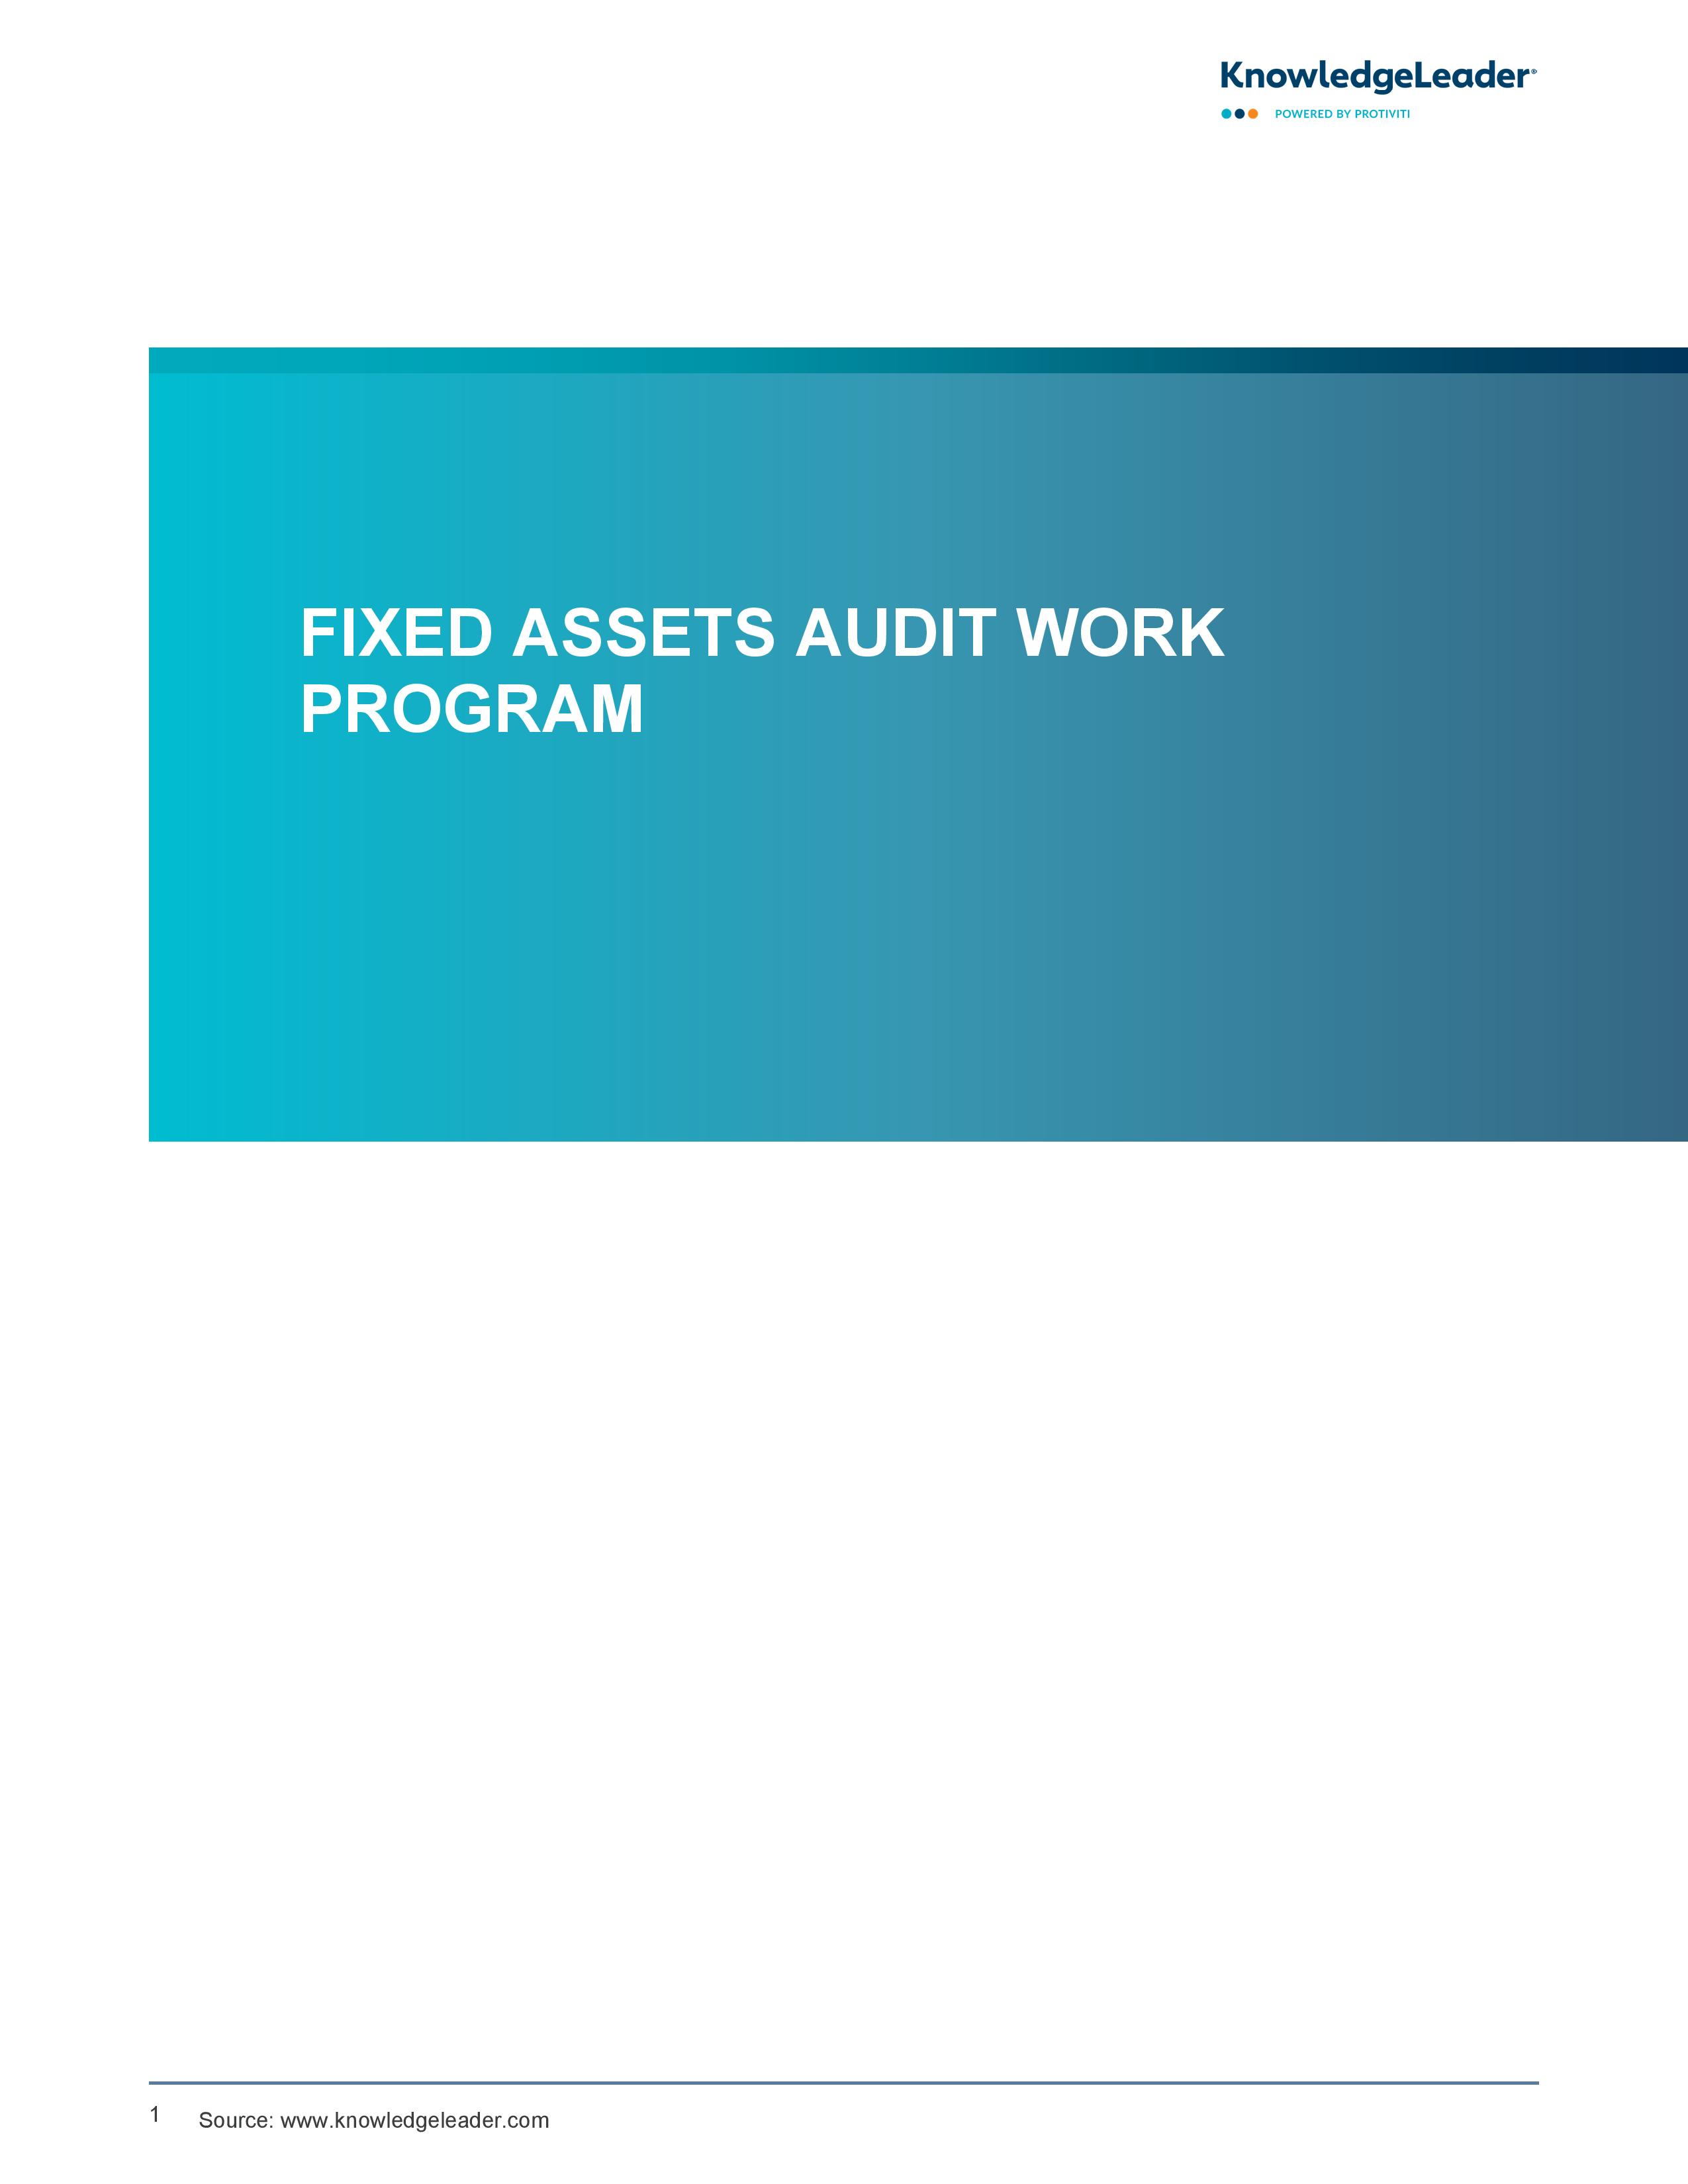 Screenshot of the first page of Fixed Assets Audit Work Program